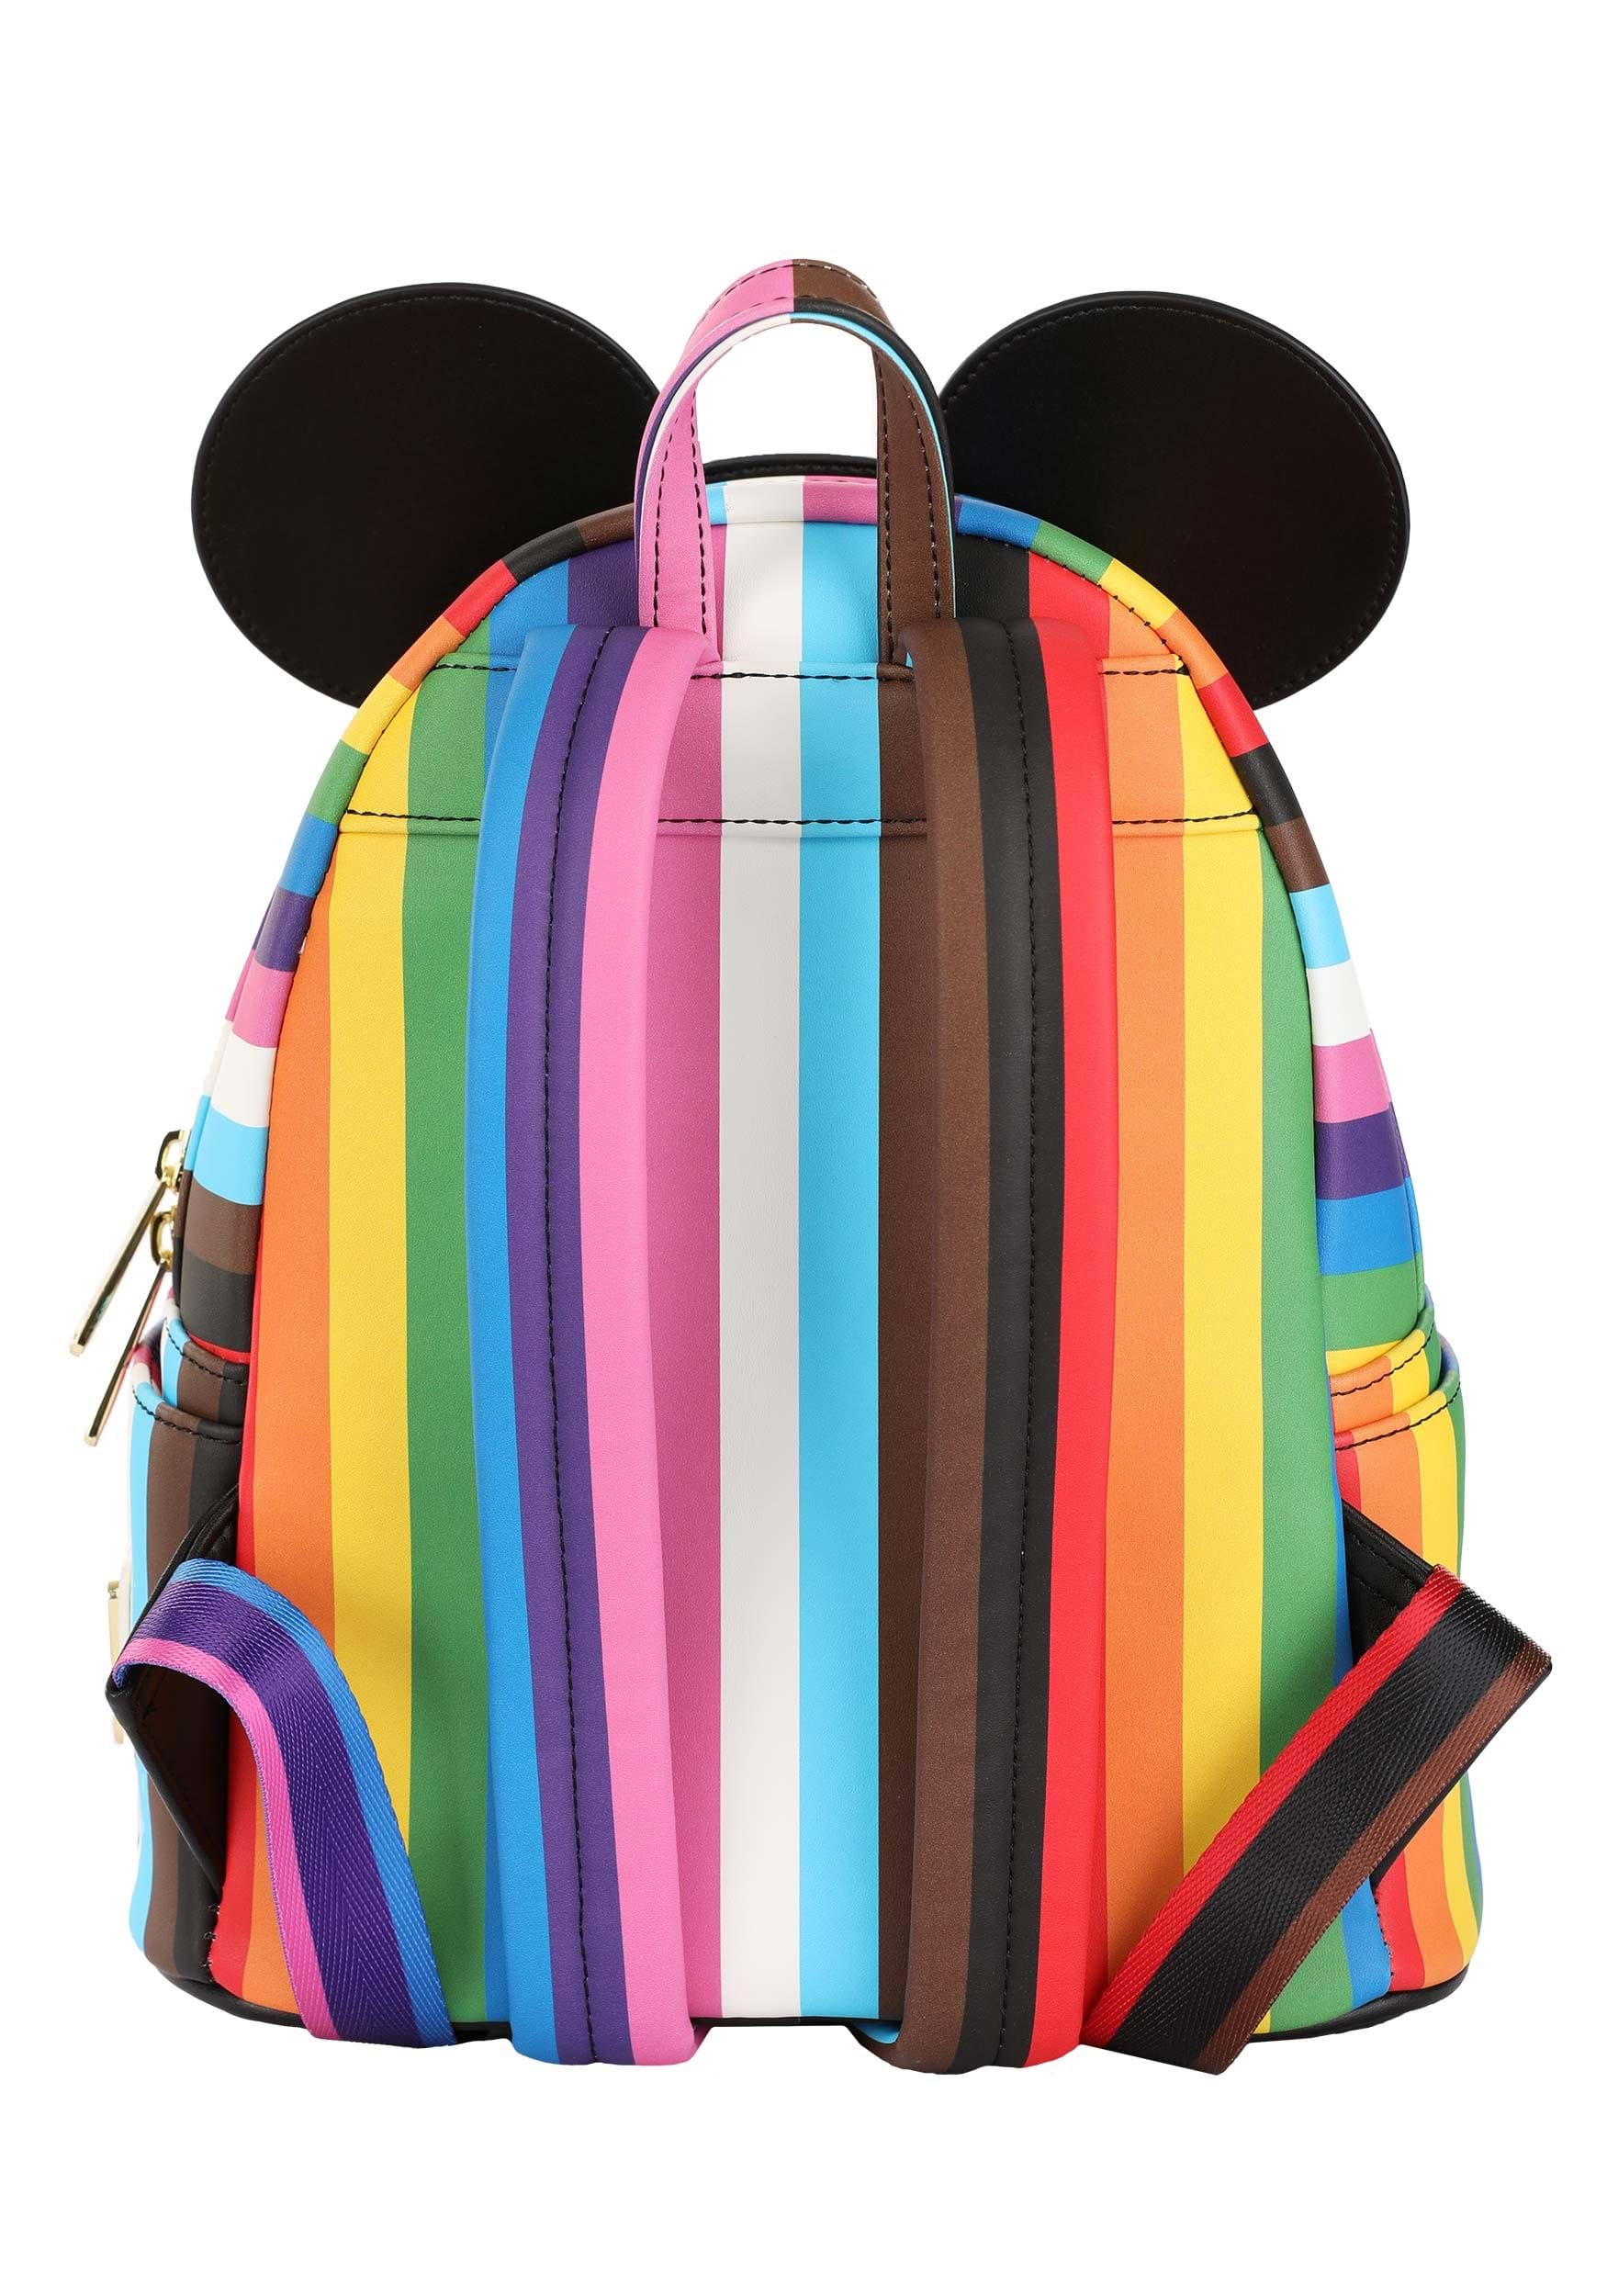 disney loungefly backpack